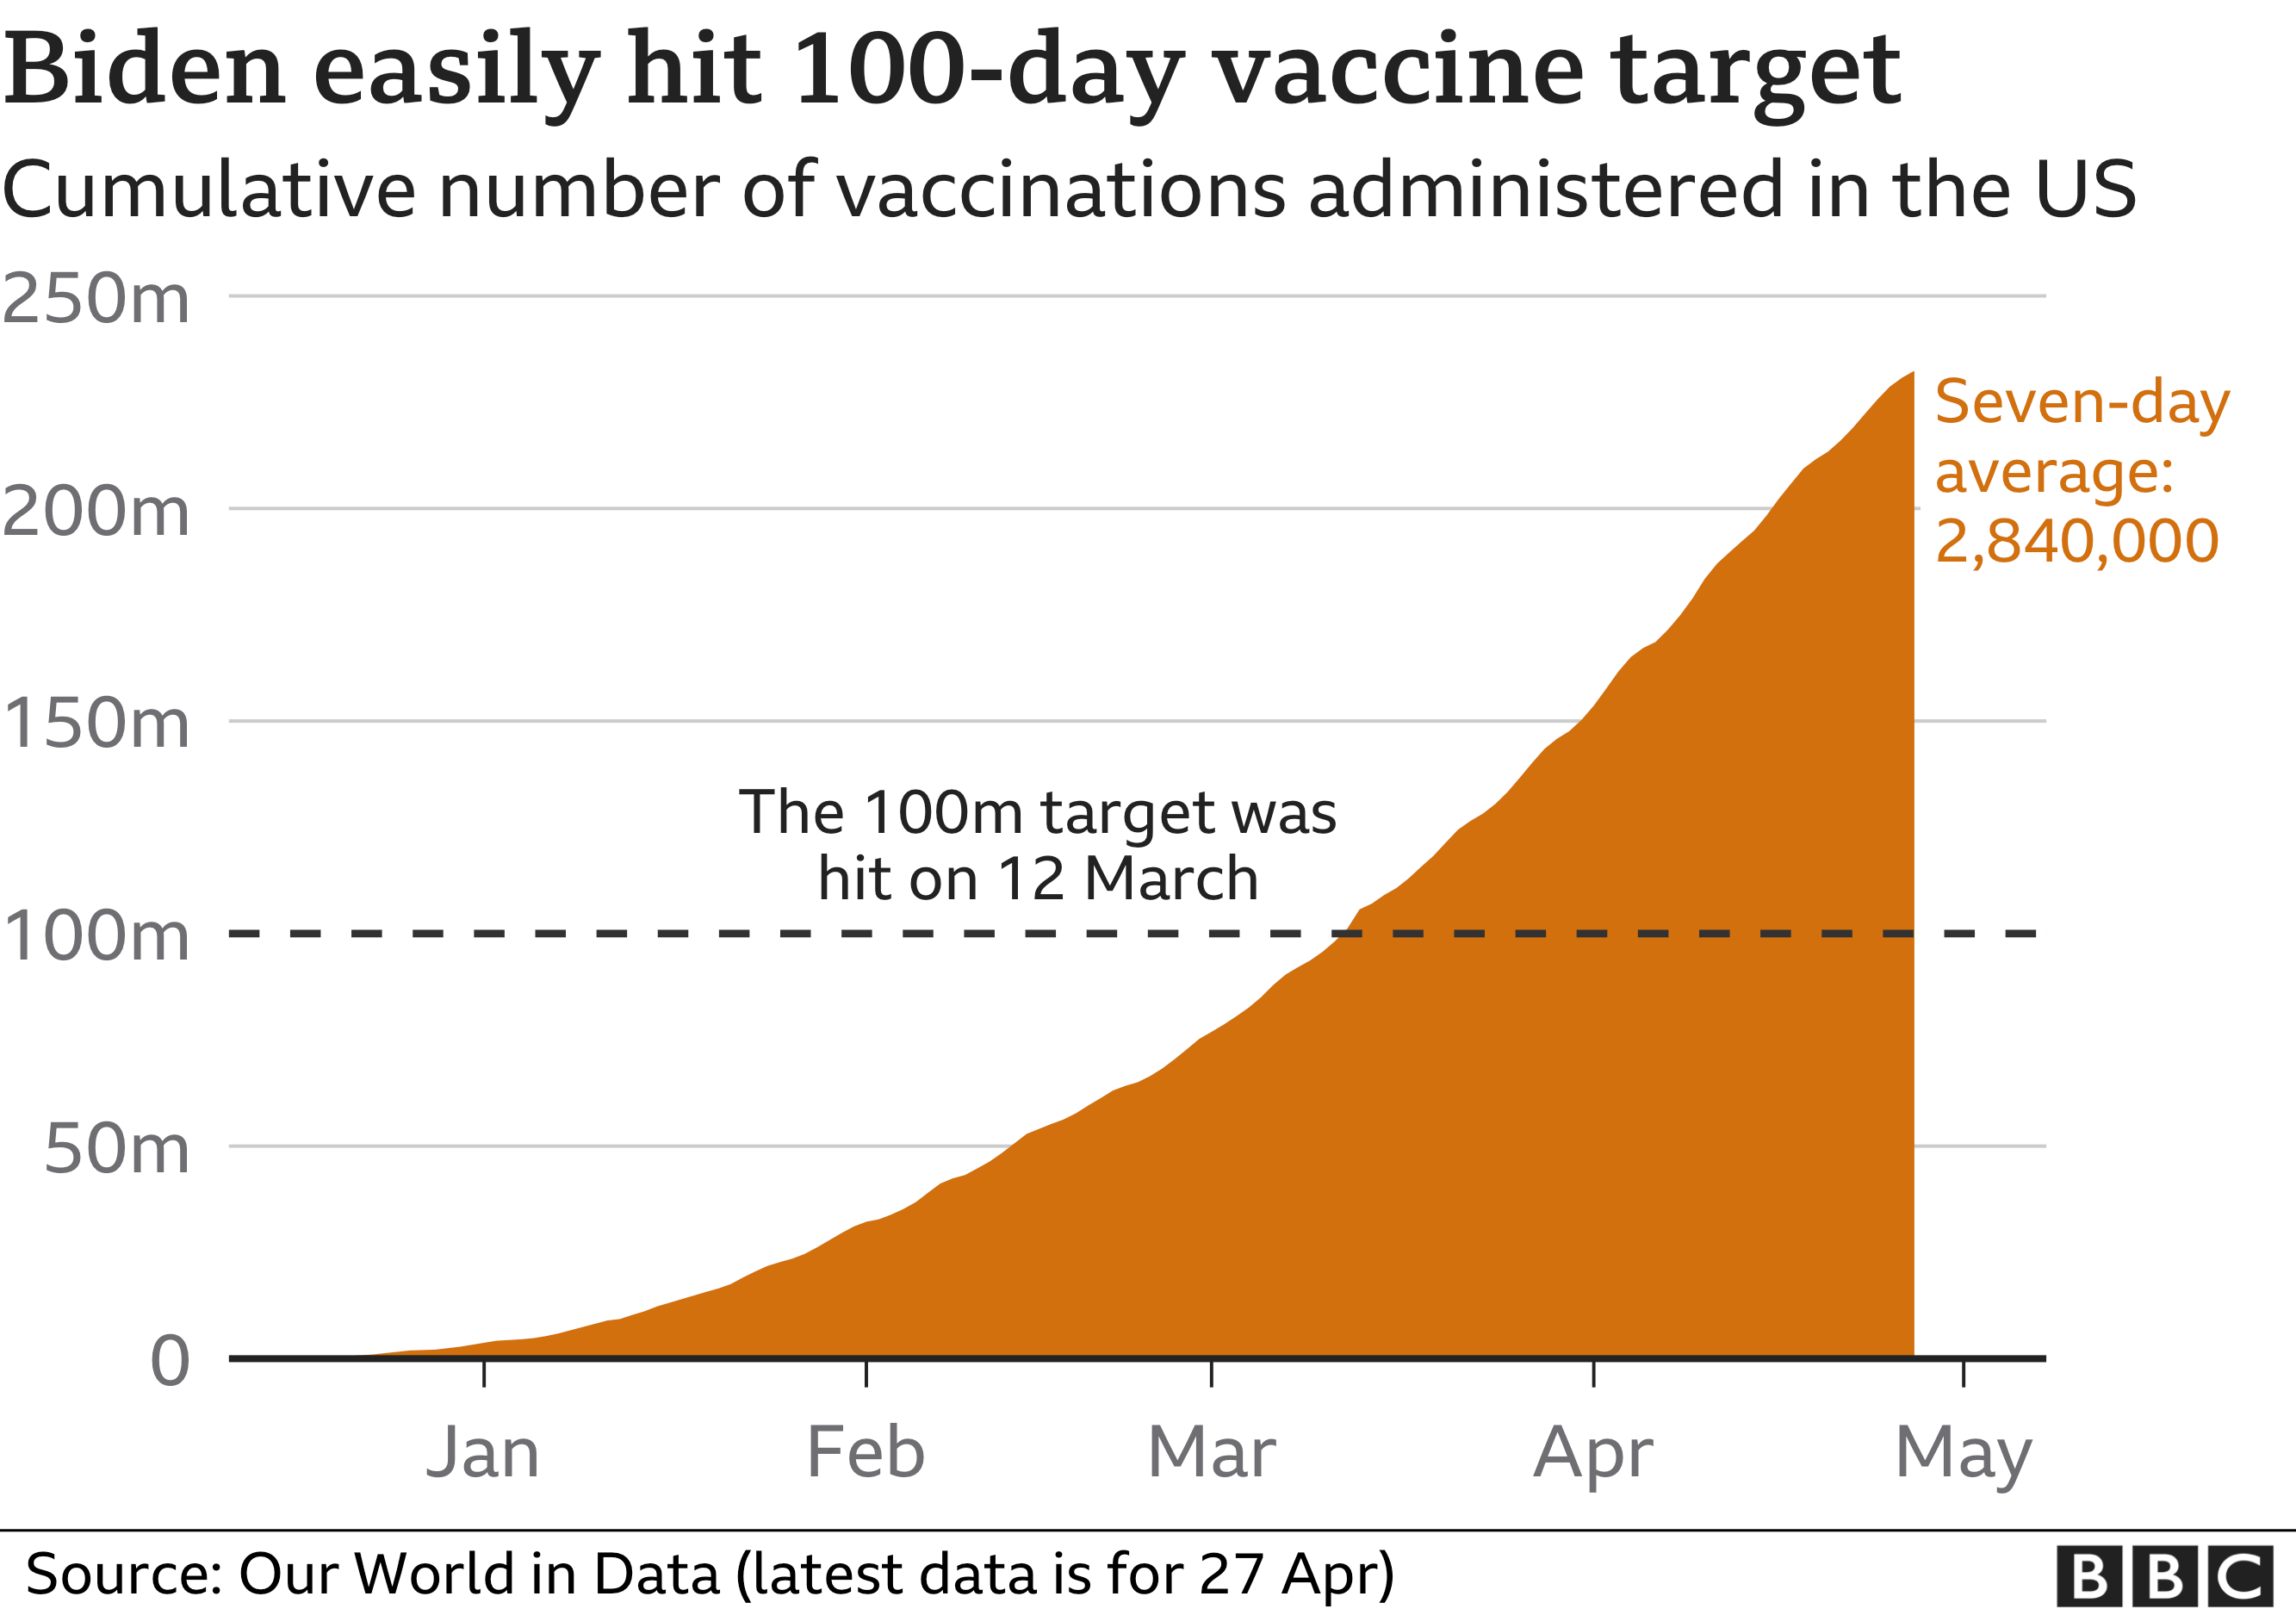 Chart showing the cumulative number of vaccinations administered in the US